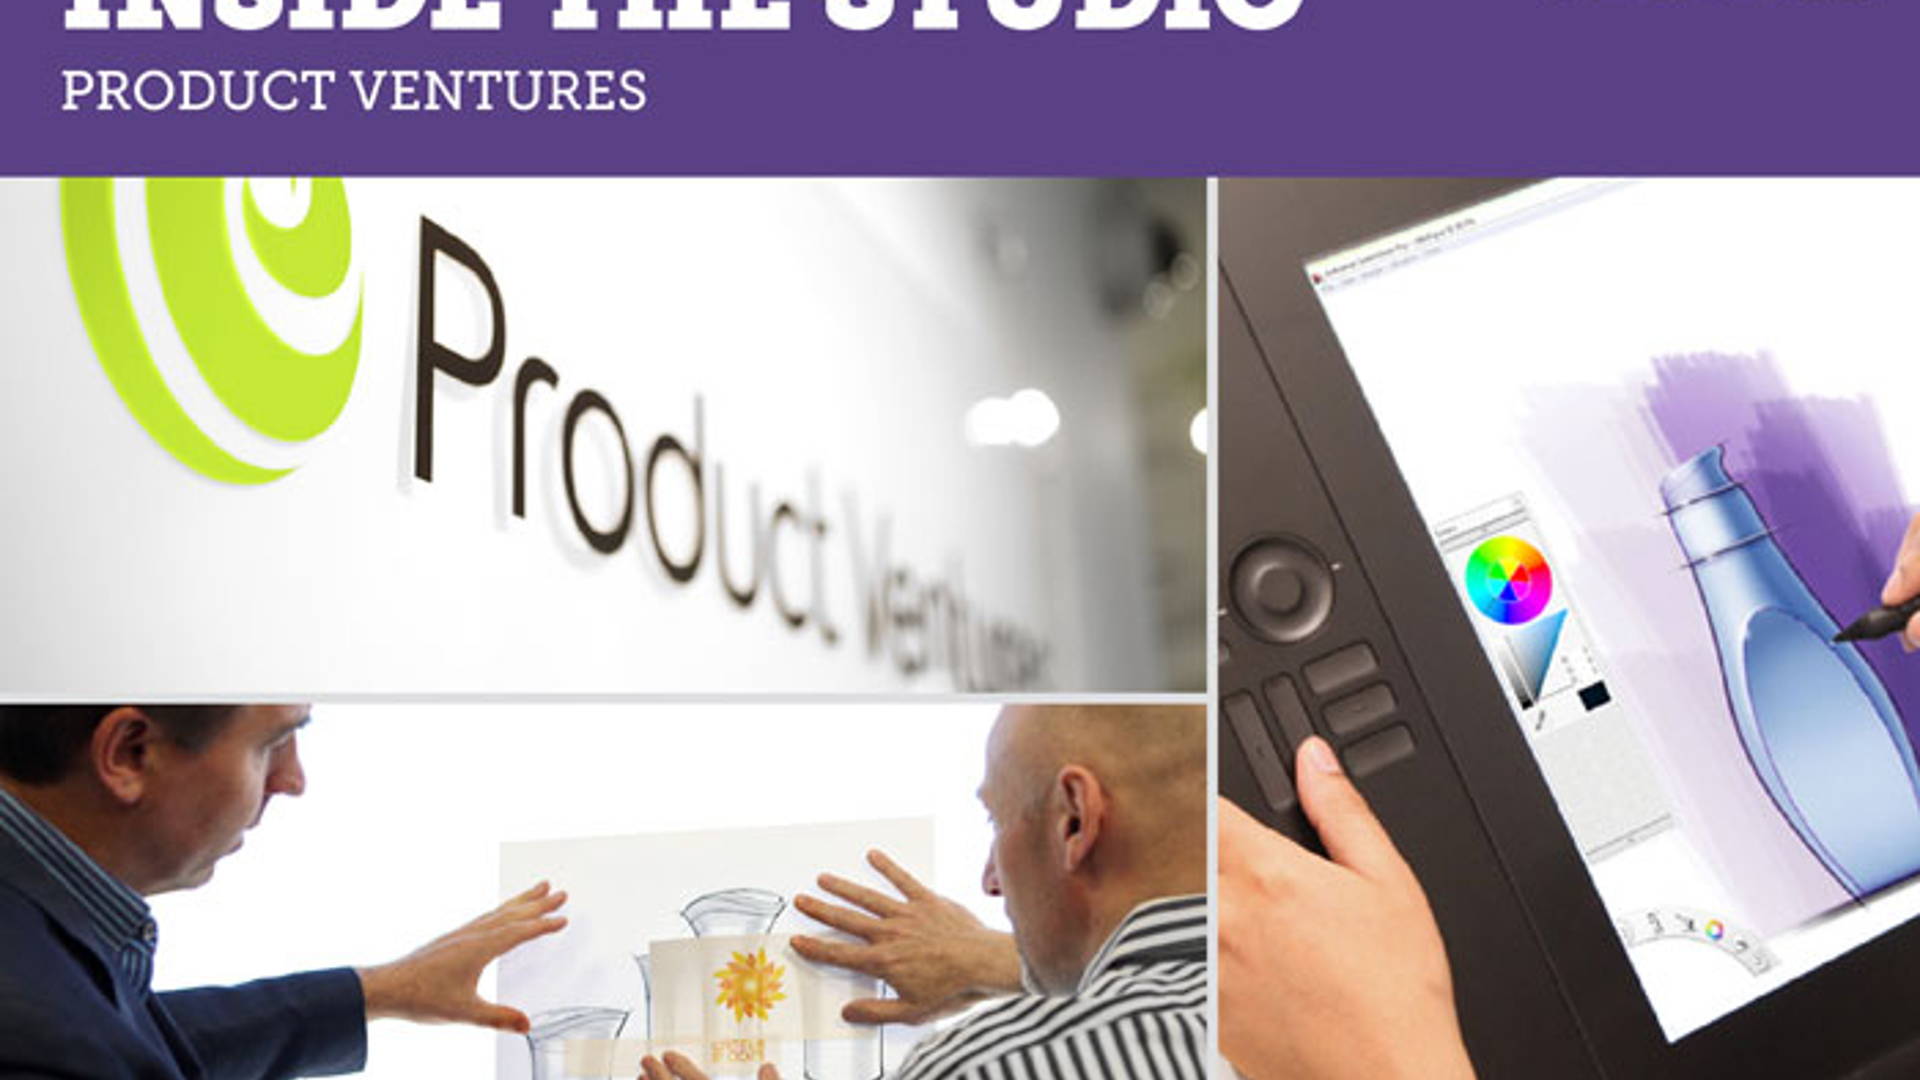 Featured image for Inside the Studio: Product Ventures